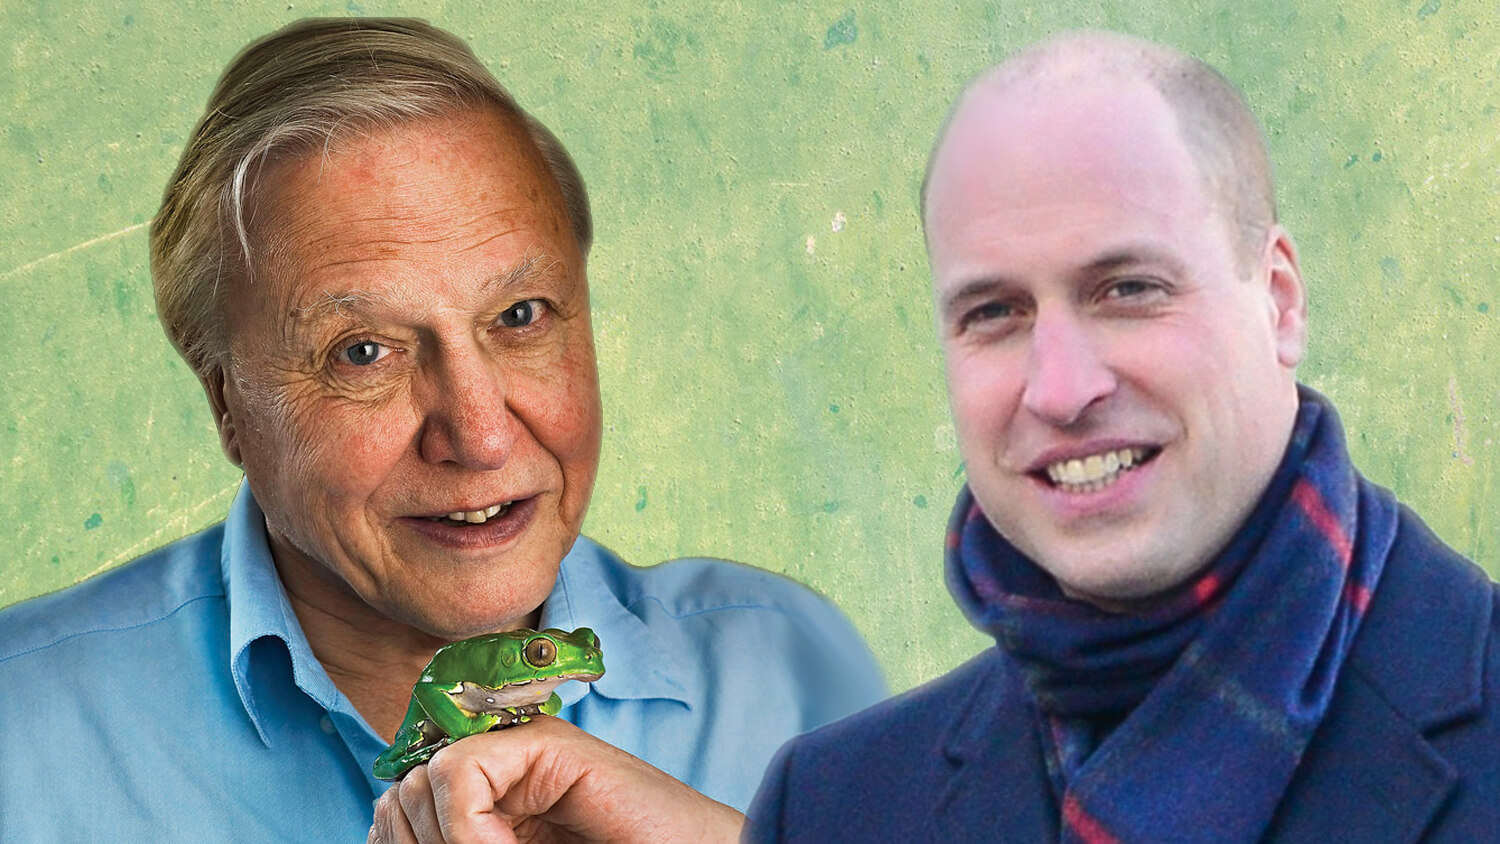 This Is How Prince William and David Attenborough Plan to Save the Planet